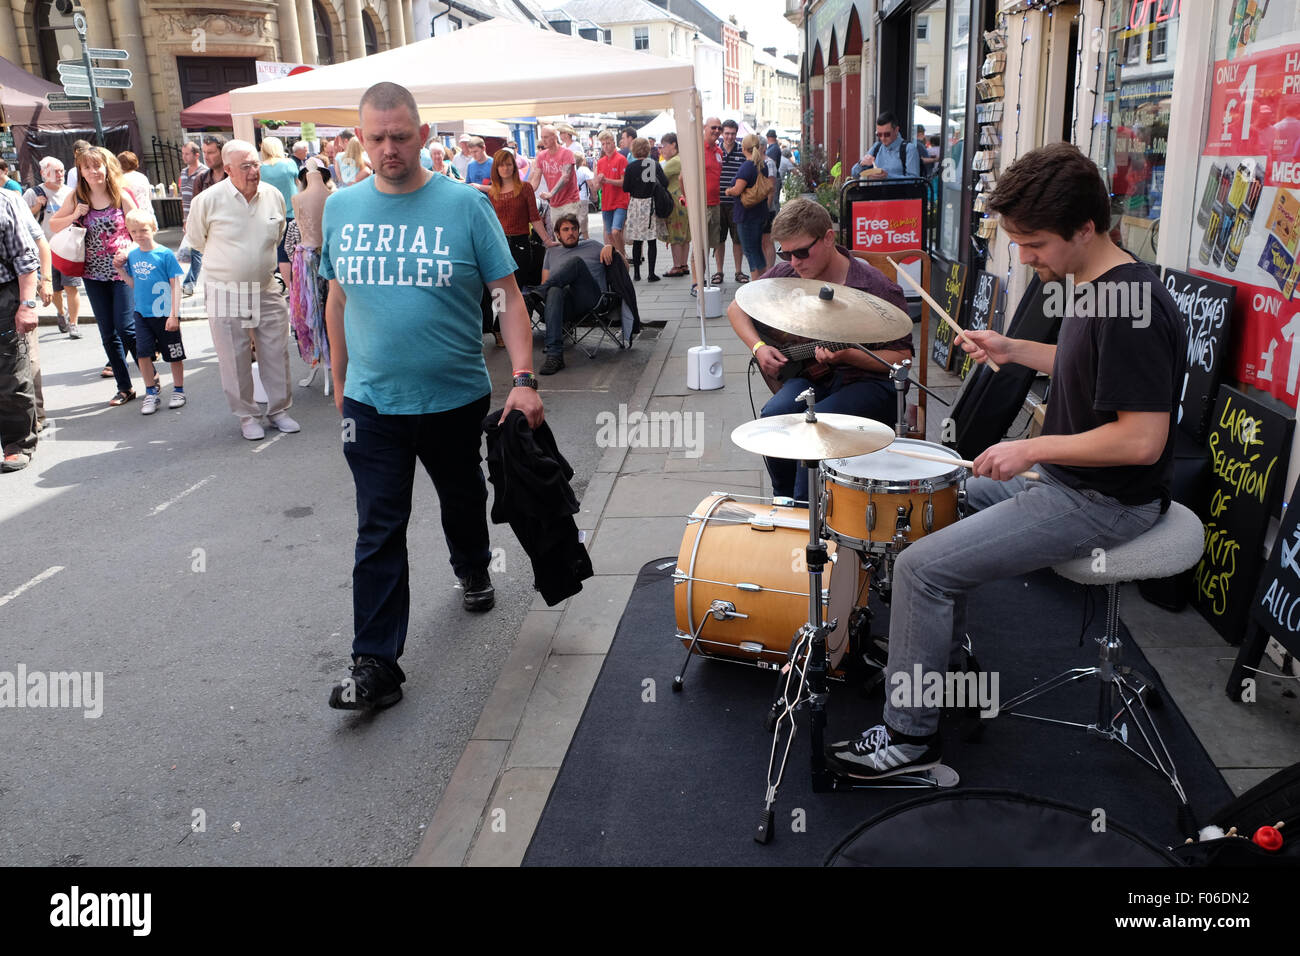 Jazz Festival Brecon, Powys, Wales, UK. 8th Aug, 2015. Brecon town centre fills with jazz and music festival fans and impromptu street musicians during the Brecon Jazz and Brecon Fringe Festival. Stock Photo